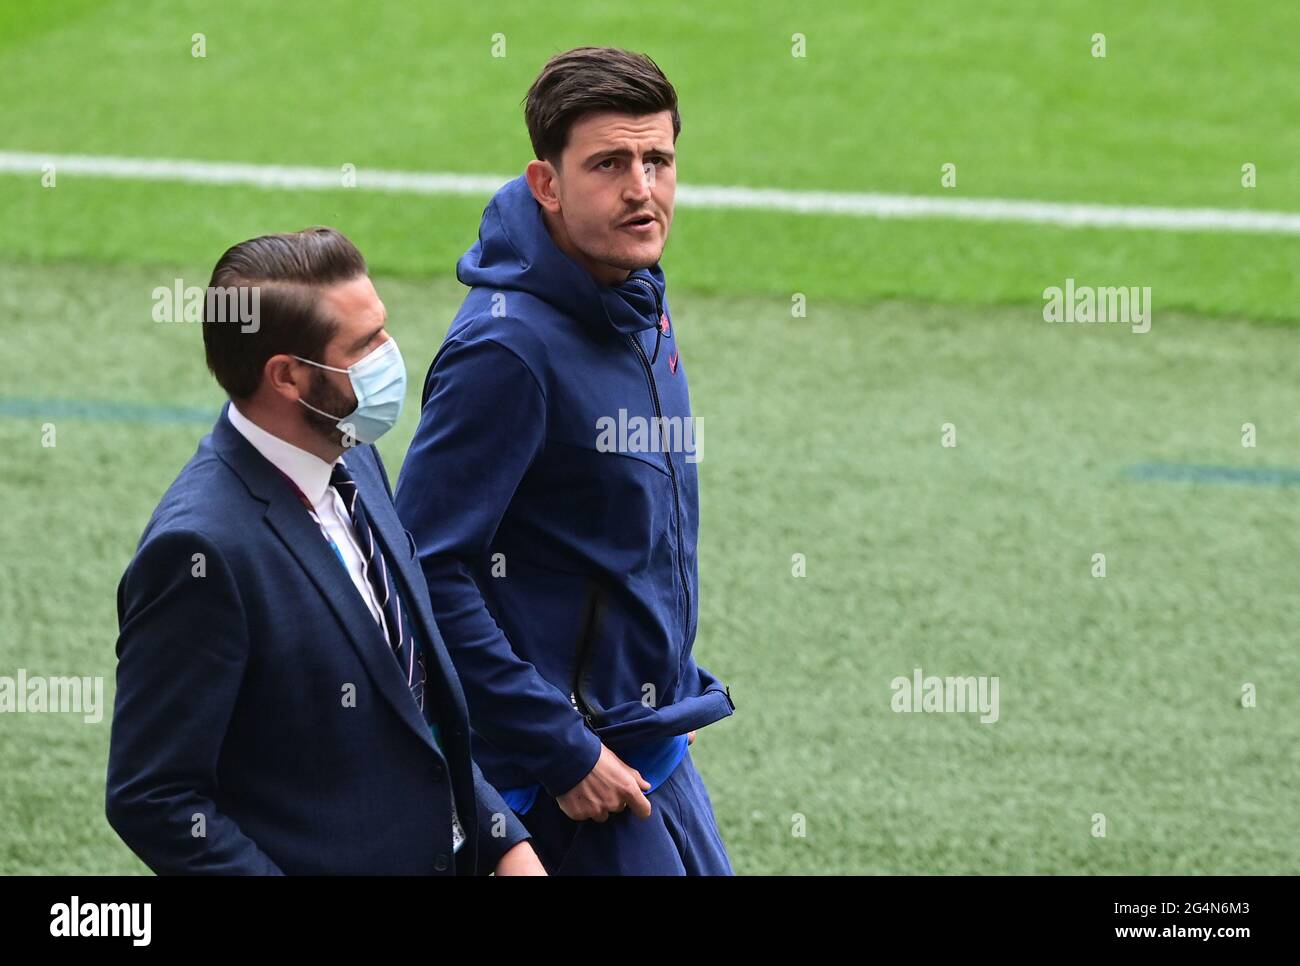 Soccer Football - Euro 2020 - Group D - Czech Republic v England - Wembley Stadium, London, Britain - June 22, 2021 England's Harry Maguire by the pitch before the match Pool via REUTERS/Neil Hall Stock Photo